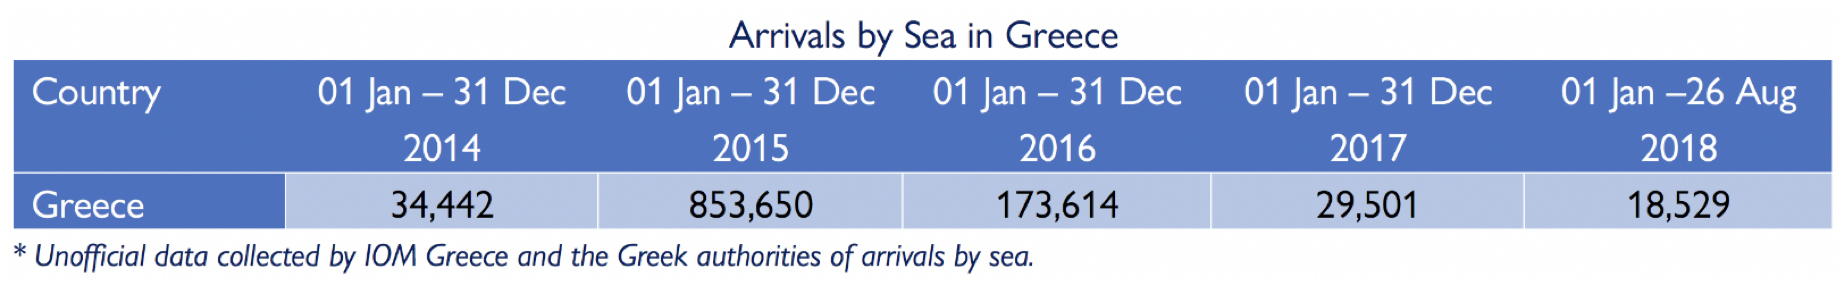 Arrivals by sea in Greece